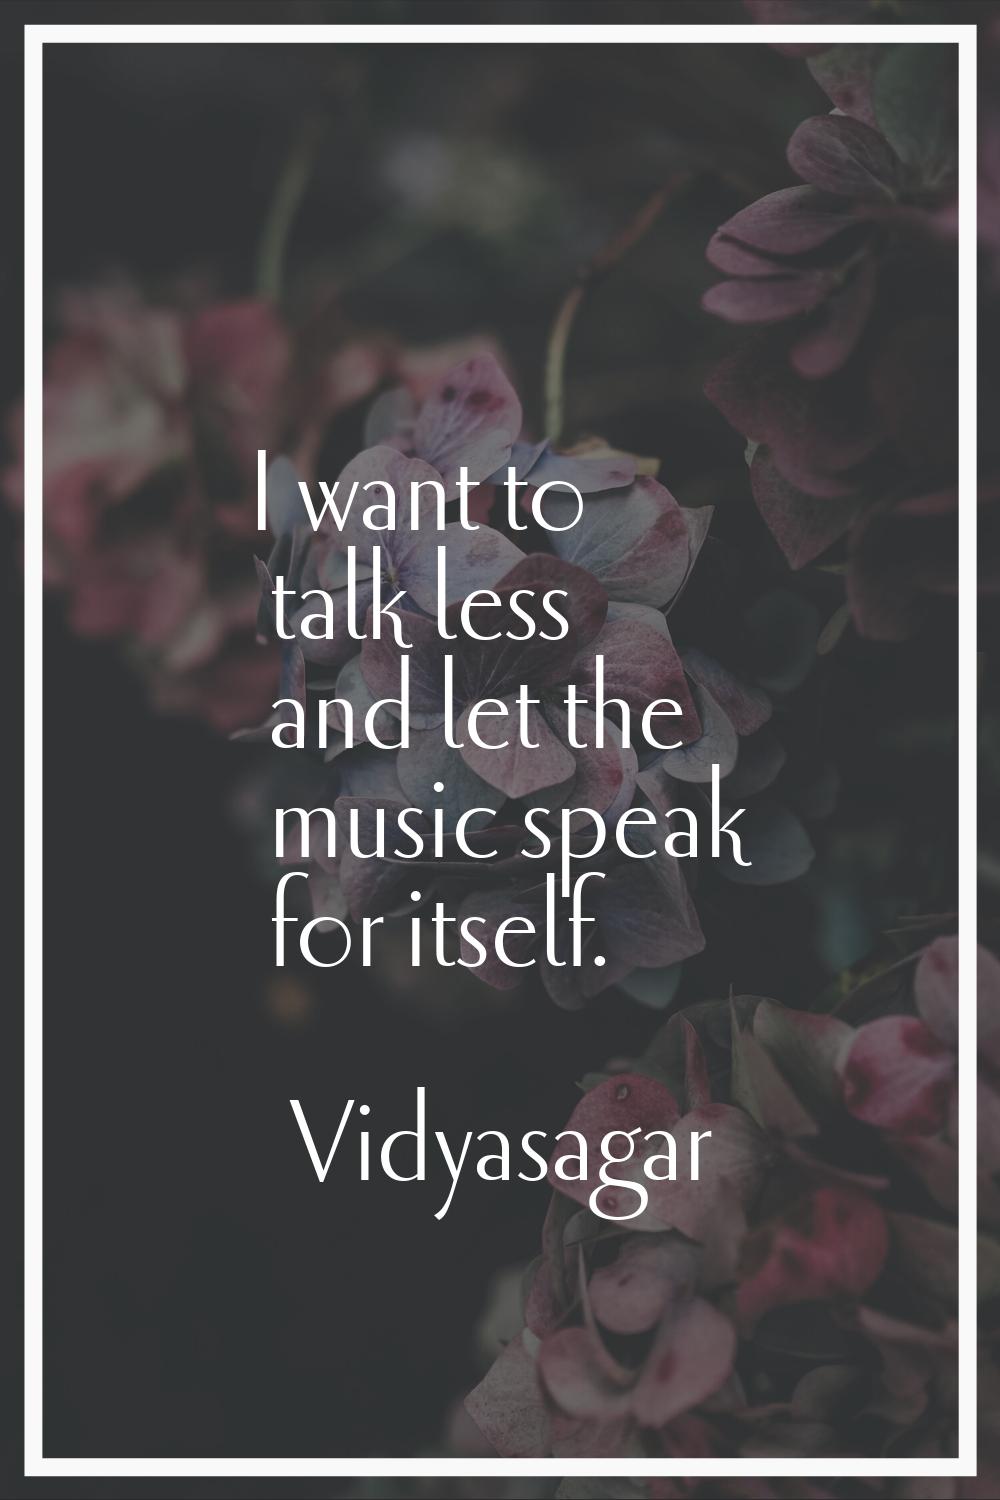 I want to talk less and let the music speak for itself.